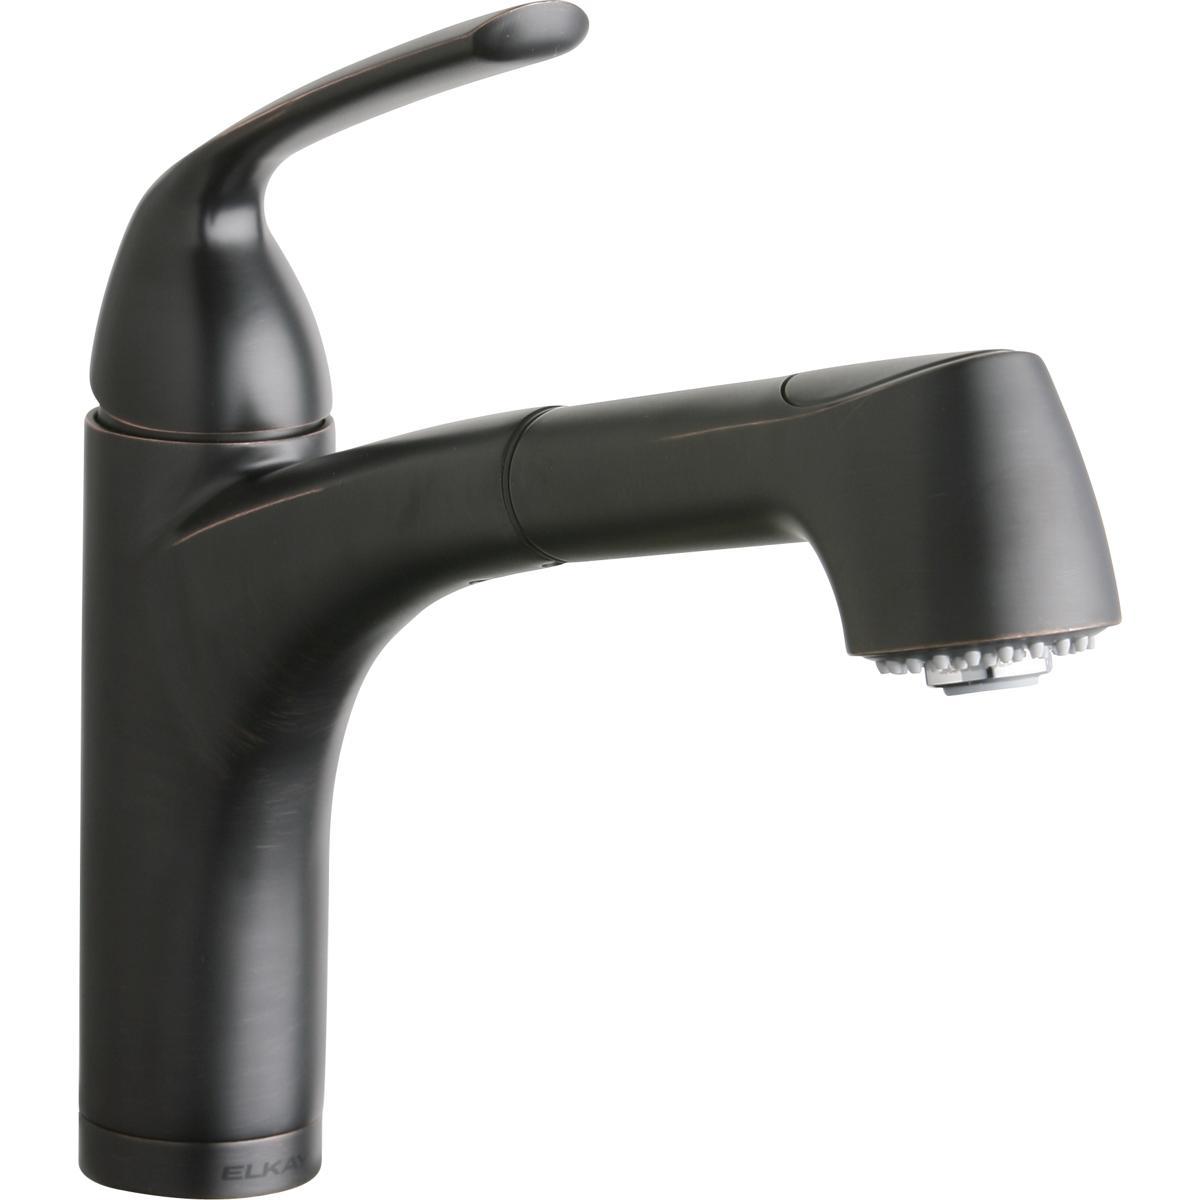 Elkay Gourmet Single Hole Bar Faucet Pull-out Spray and Lever Handle-DirectSinks